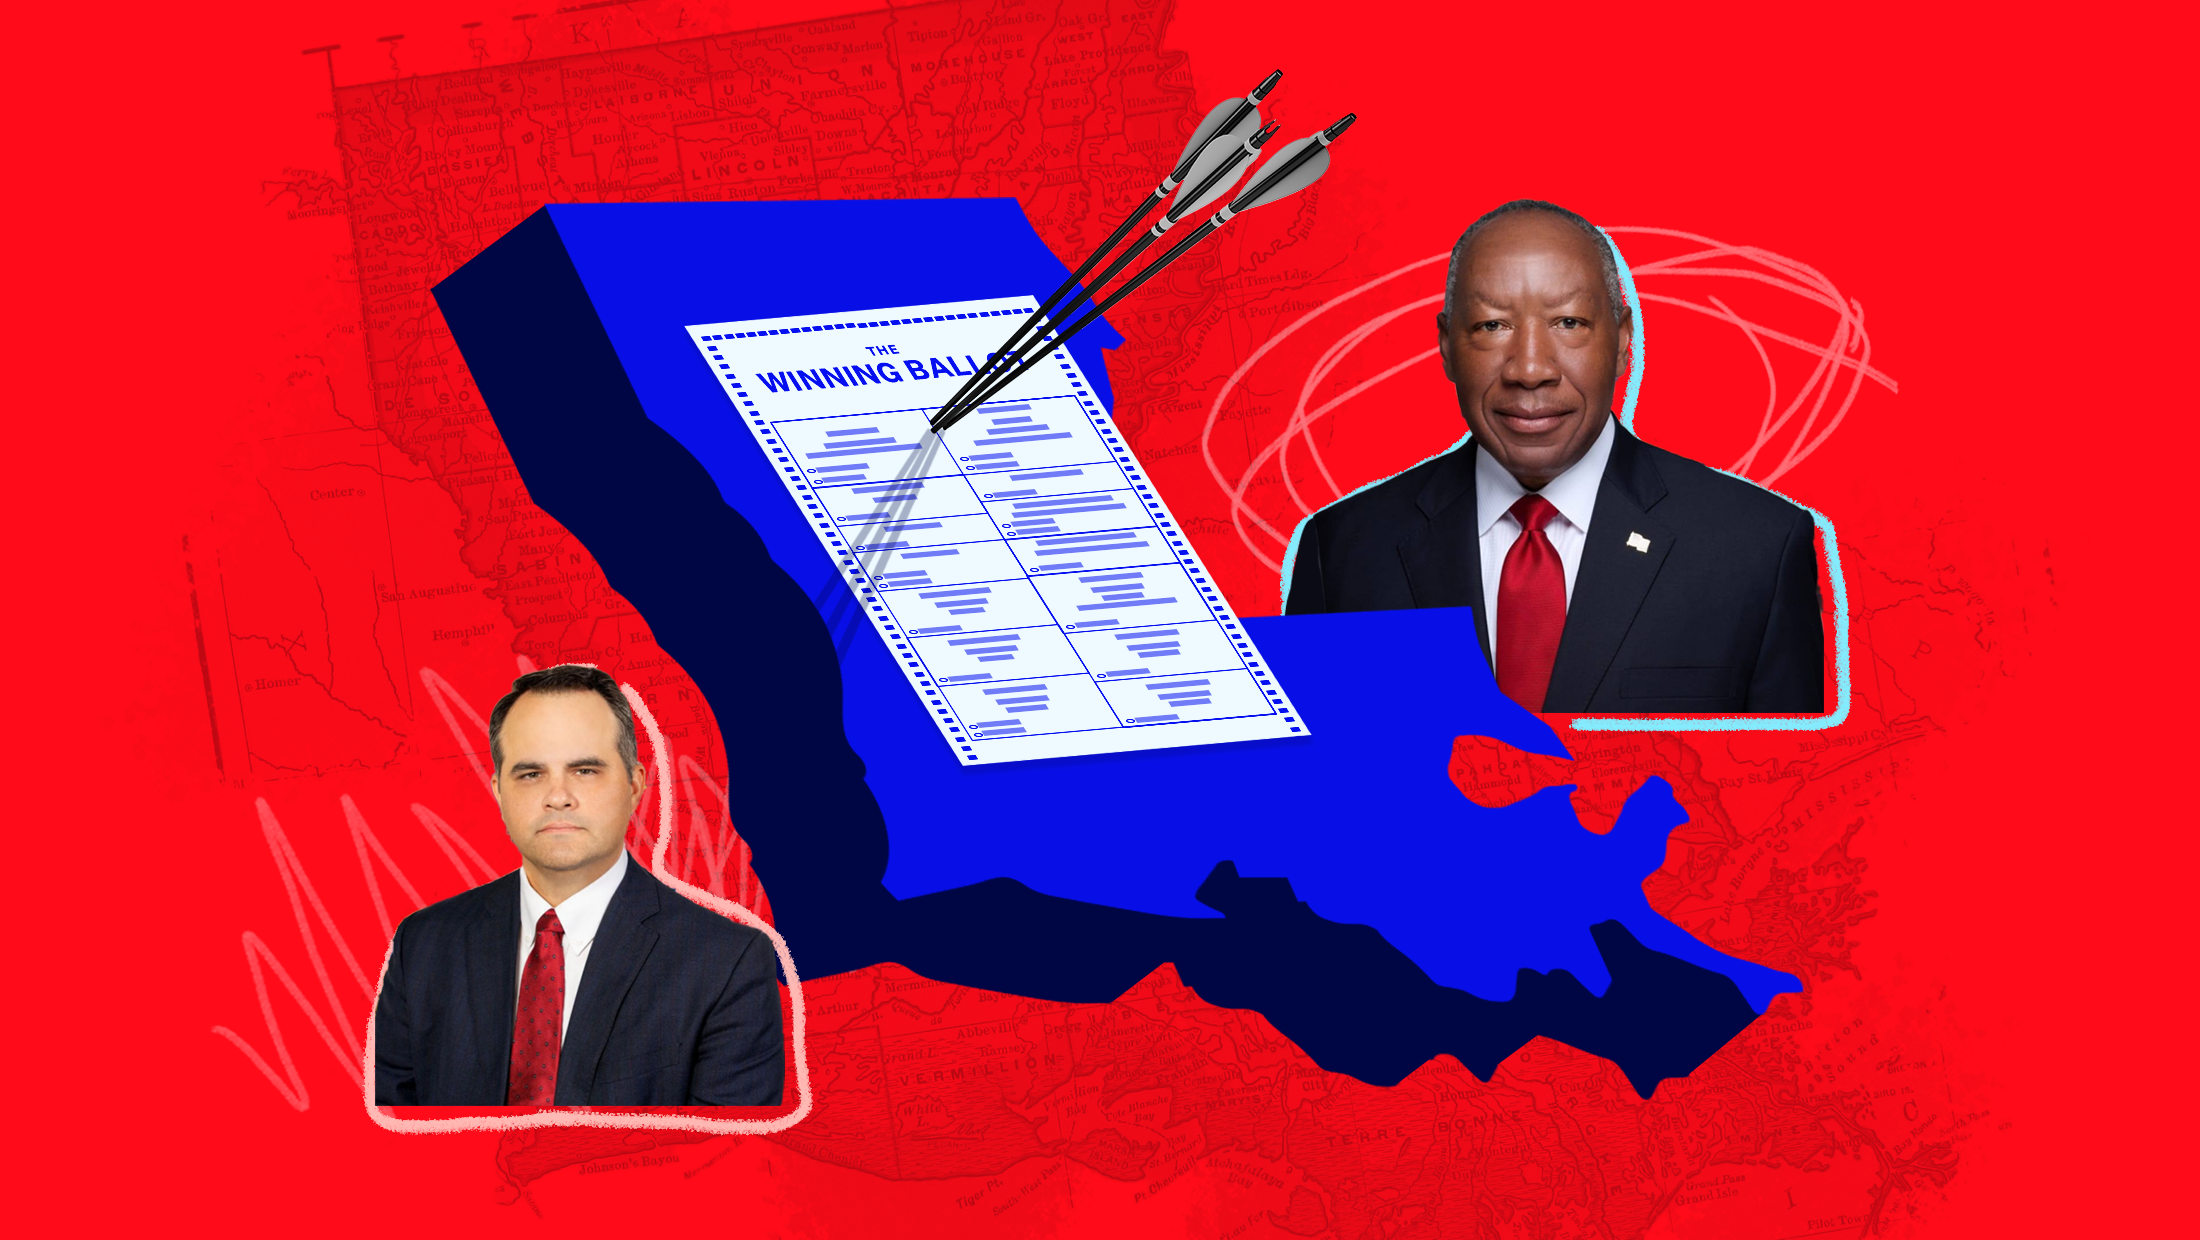 Red background with a map of Louisiana faded into the background, and in the foreground, a blue shape of Louisiana with a ballot that reads "THE WINNING BALLOT" and three darts piercing through the middle. To the left of the state shape is John Nickelson, the white Republican candidate for Caddo Parish, Louisiana sheriff and to the right is Henry Whitehorn, the Black Democratic candidate for Caddo Parish, Louisiana sheriff.